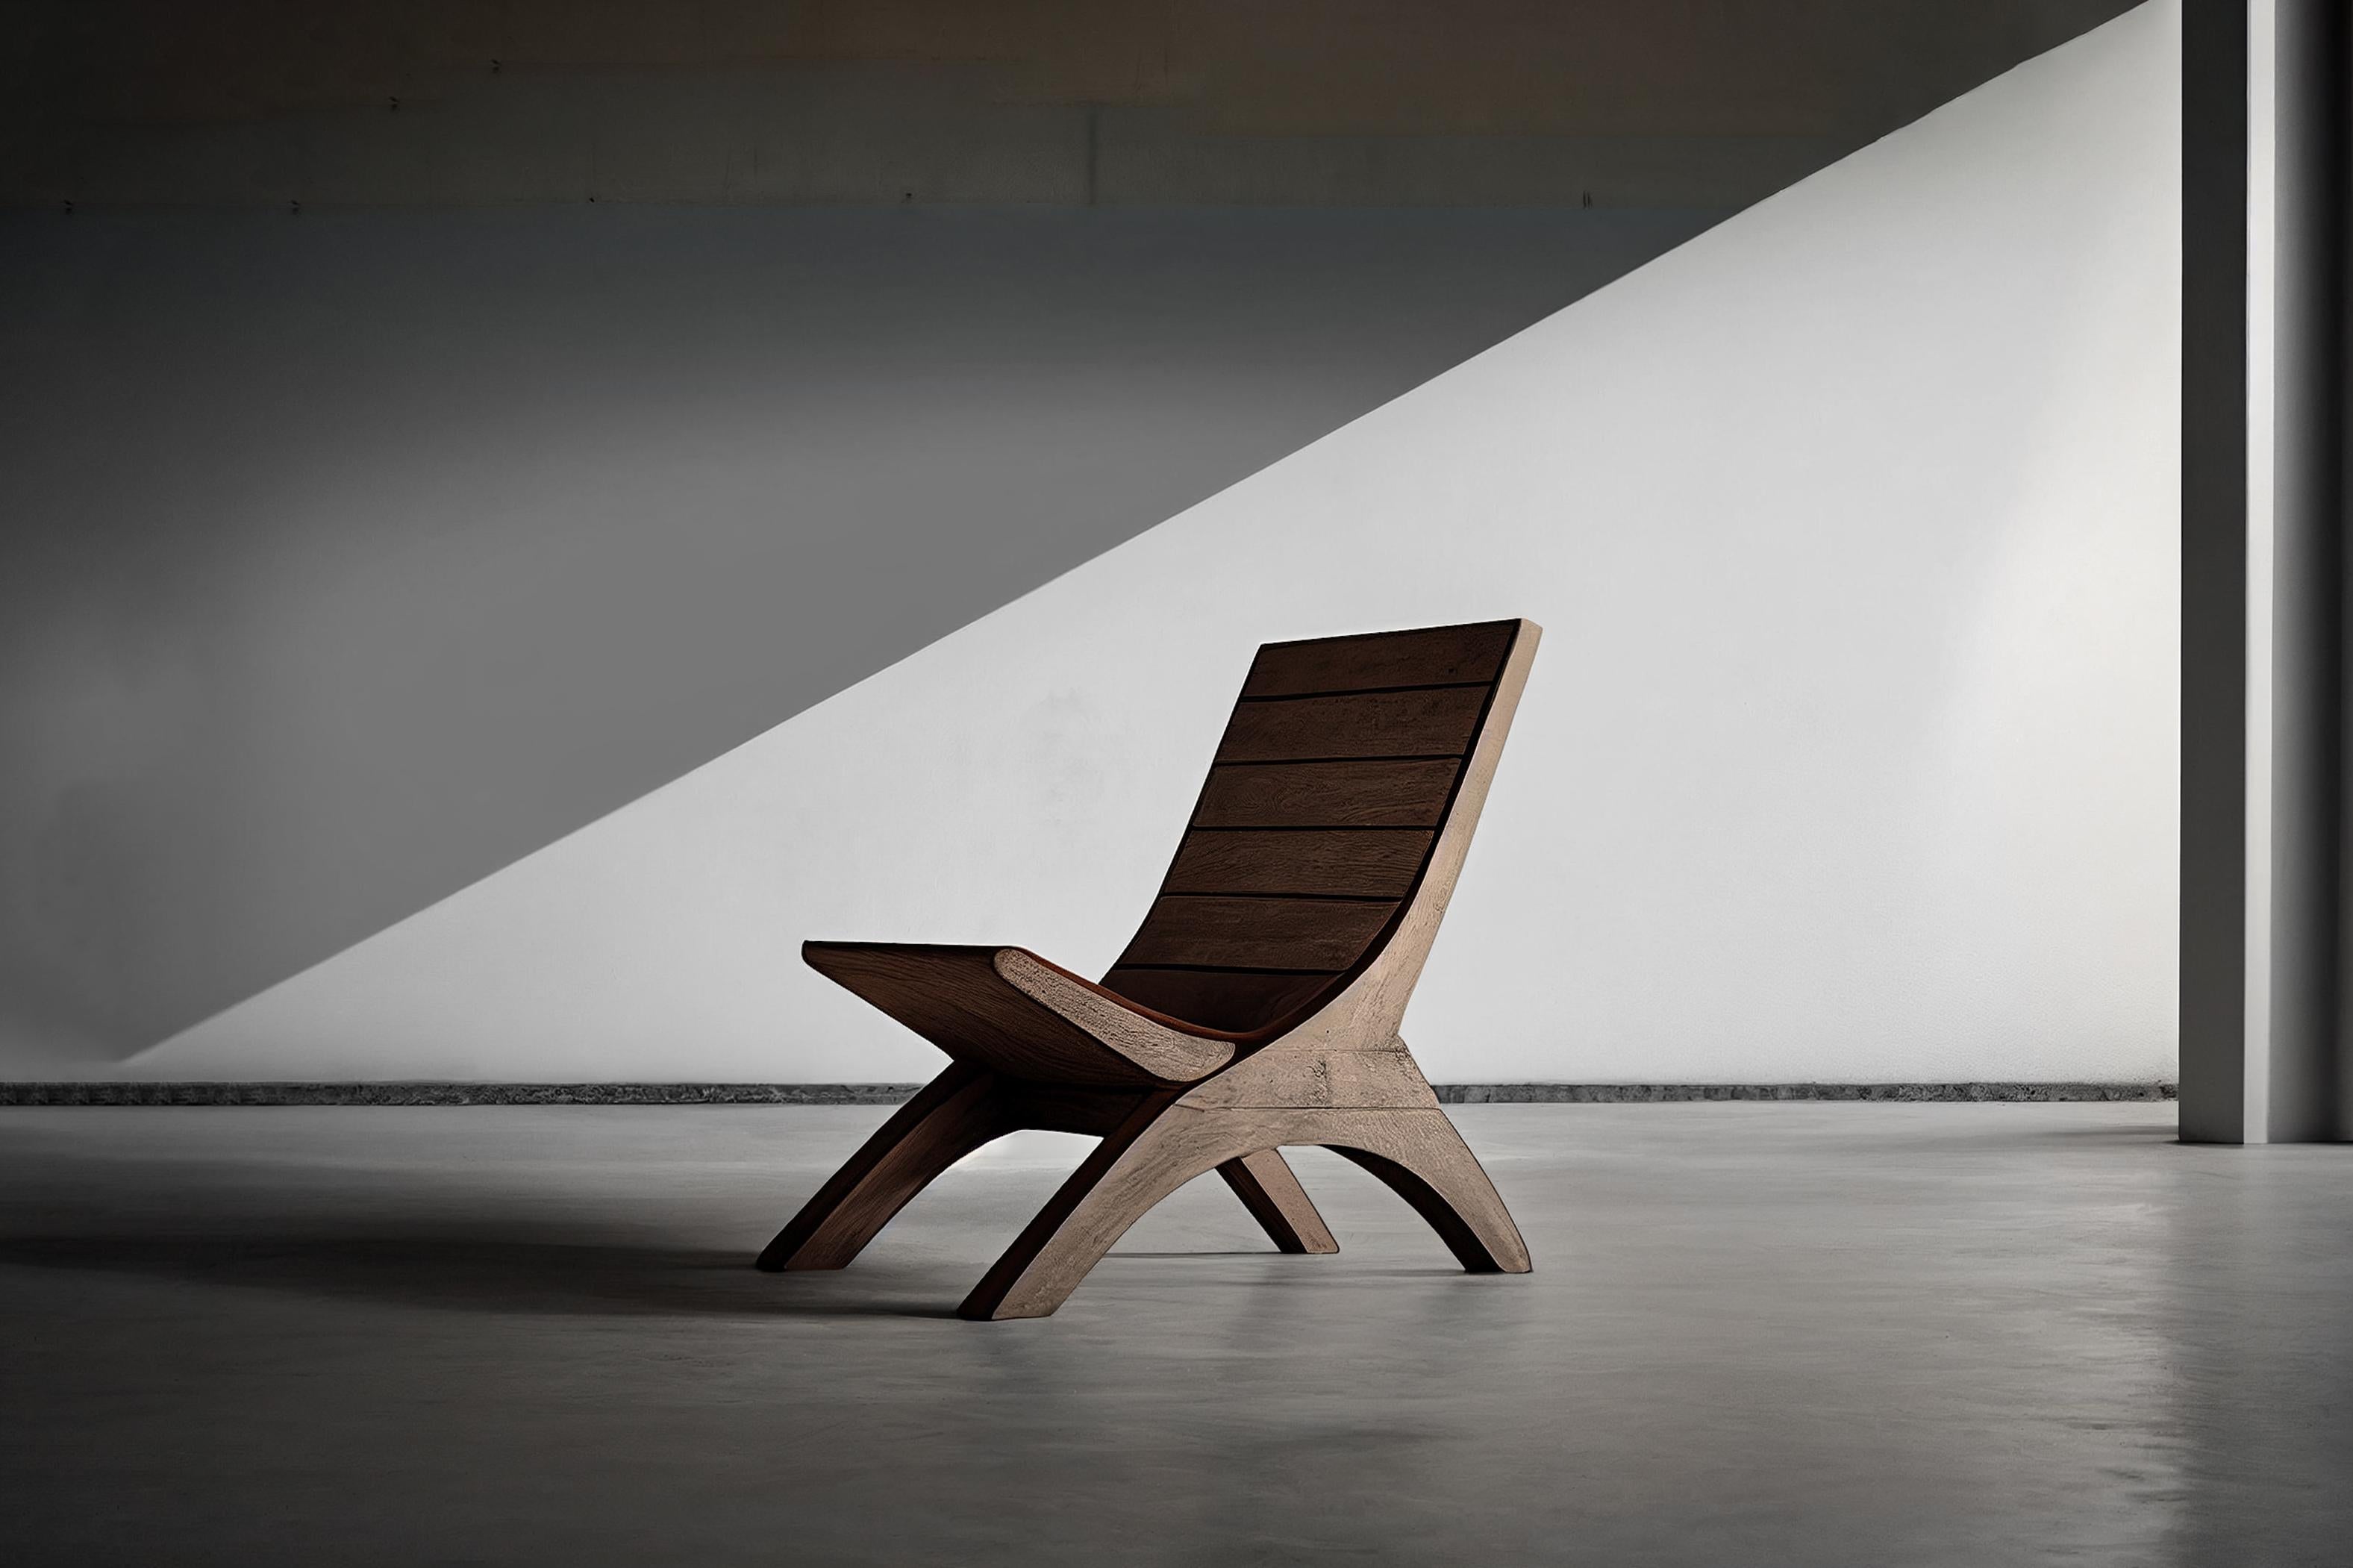 Butaque lounge chair made of solid wood inspired in Clara Porset Design 


The Butaque lounge chair is an exquisite creation by NONO that draws inspiration from the celebrated design of Clara Porset. Crafted from solid wood, the Butaque lounge chair